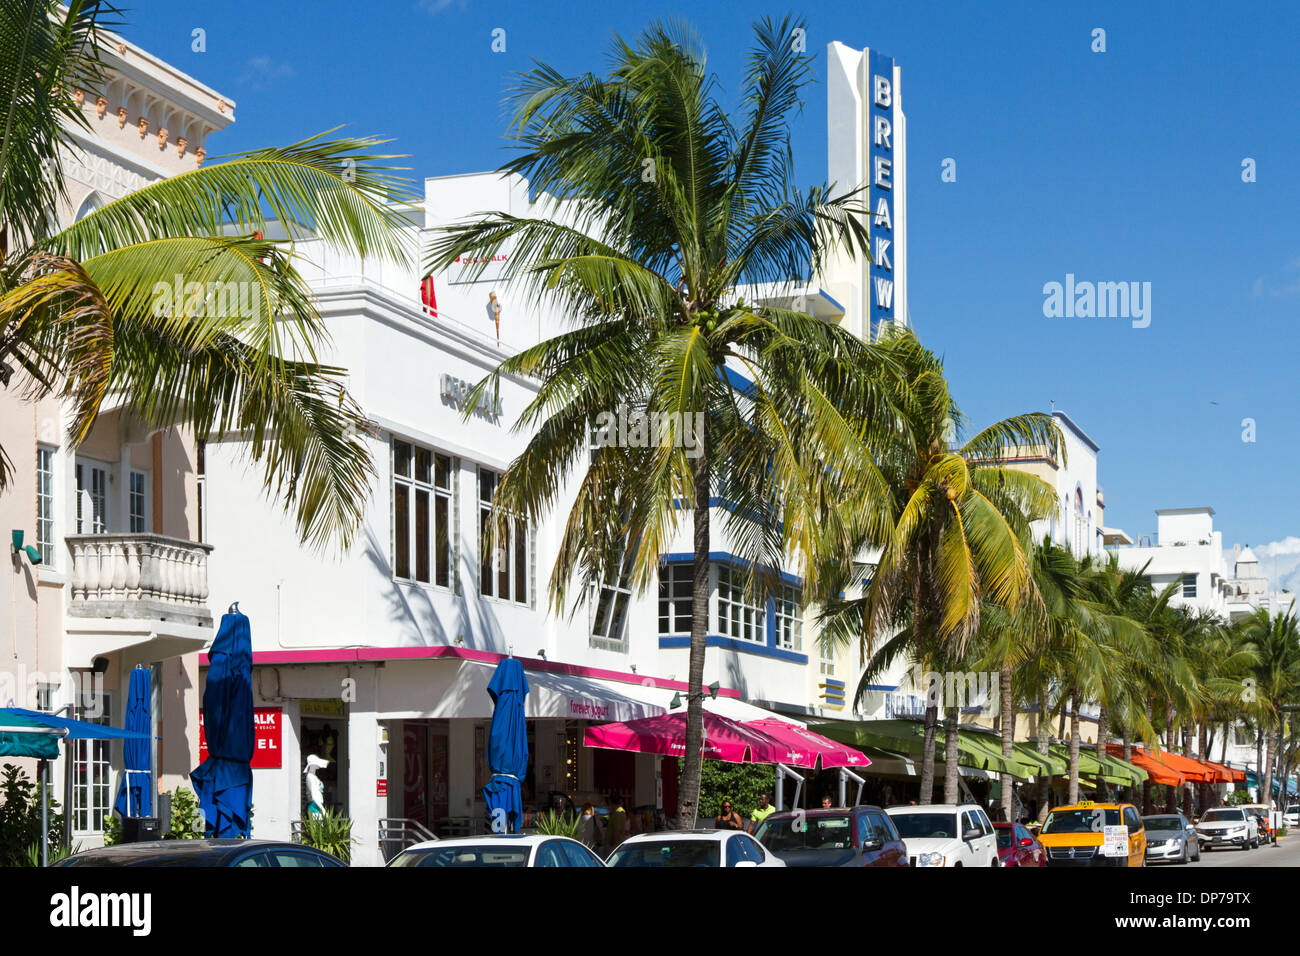 Hotels and restaurants along Miami's Ocean Drive Stock Photo